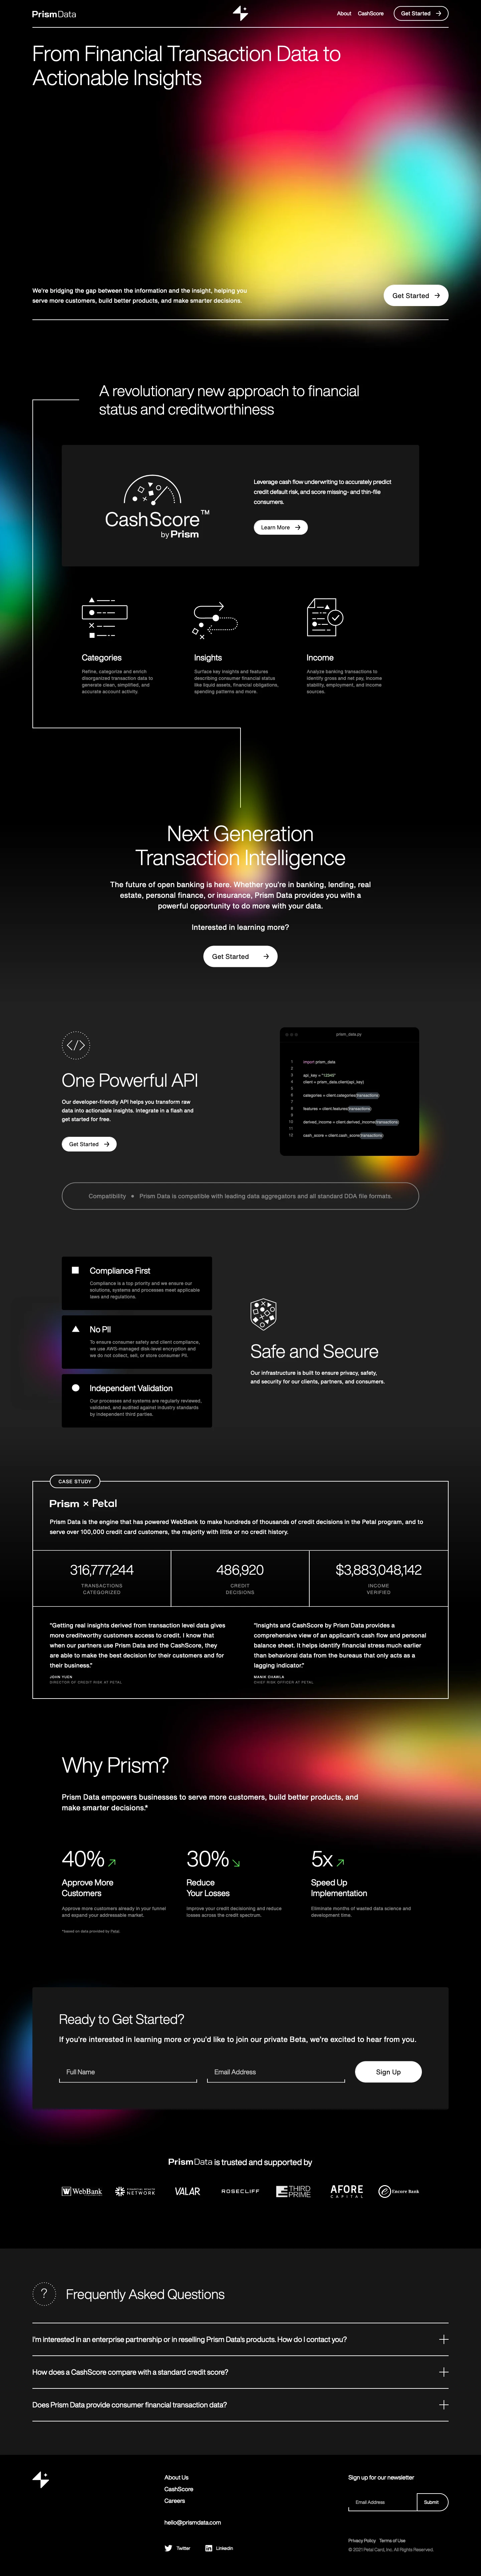 Prism Data Landing Page Example: Prism Data is a next-generation transaction intelligence platform that helps you serve more customers, build better products, and make smarter decisions.